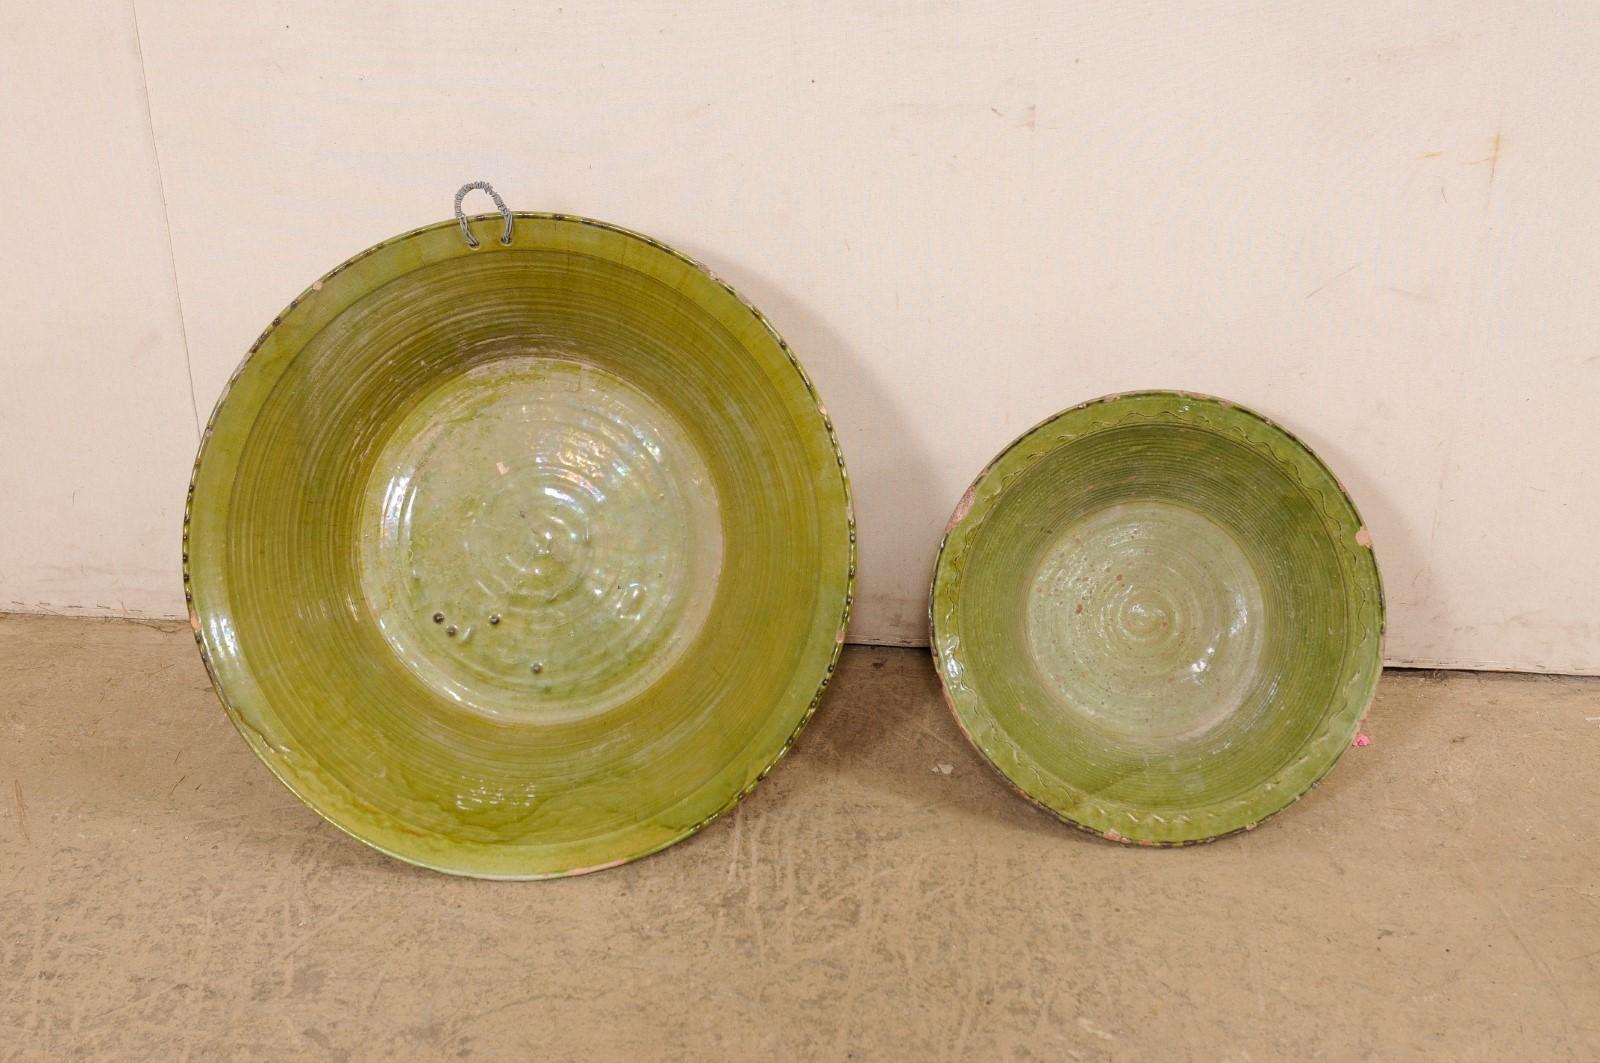 A Spanish pair of glazed terracotta bowl from the early 20th century. These antique bowls from Spain are round in shape, with widest part being at the top lip, and gradually tapering down and resting upon a flat base. There is a green glaze about